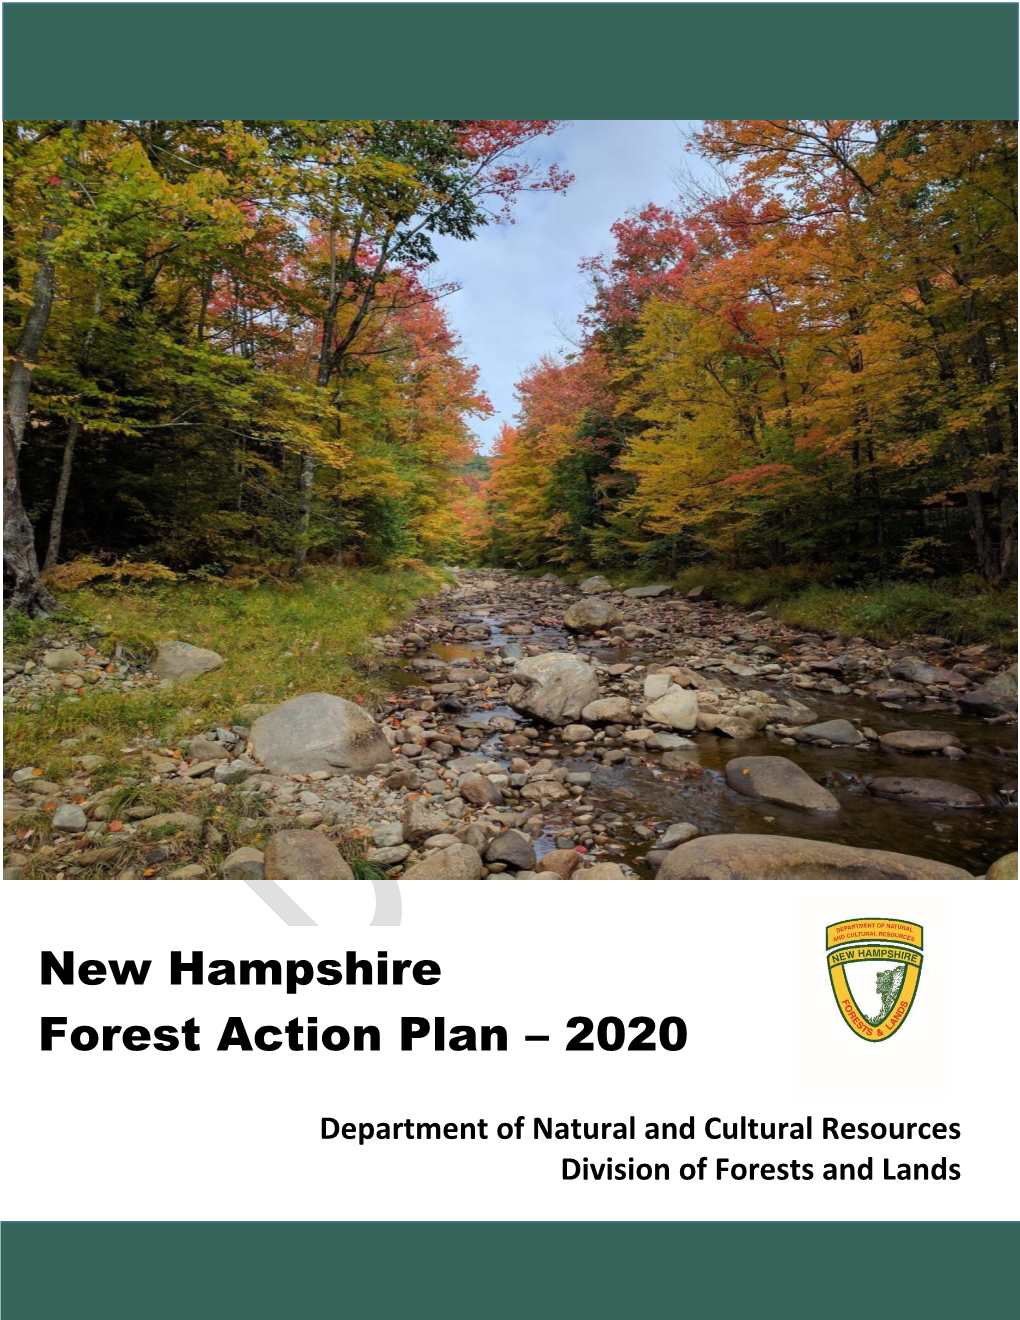 Draft 2020 New Hampshire Forest Action Plan